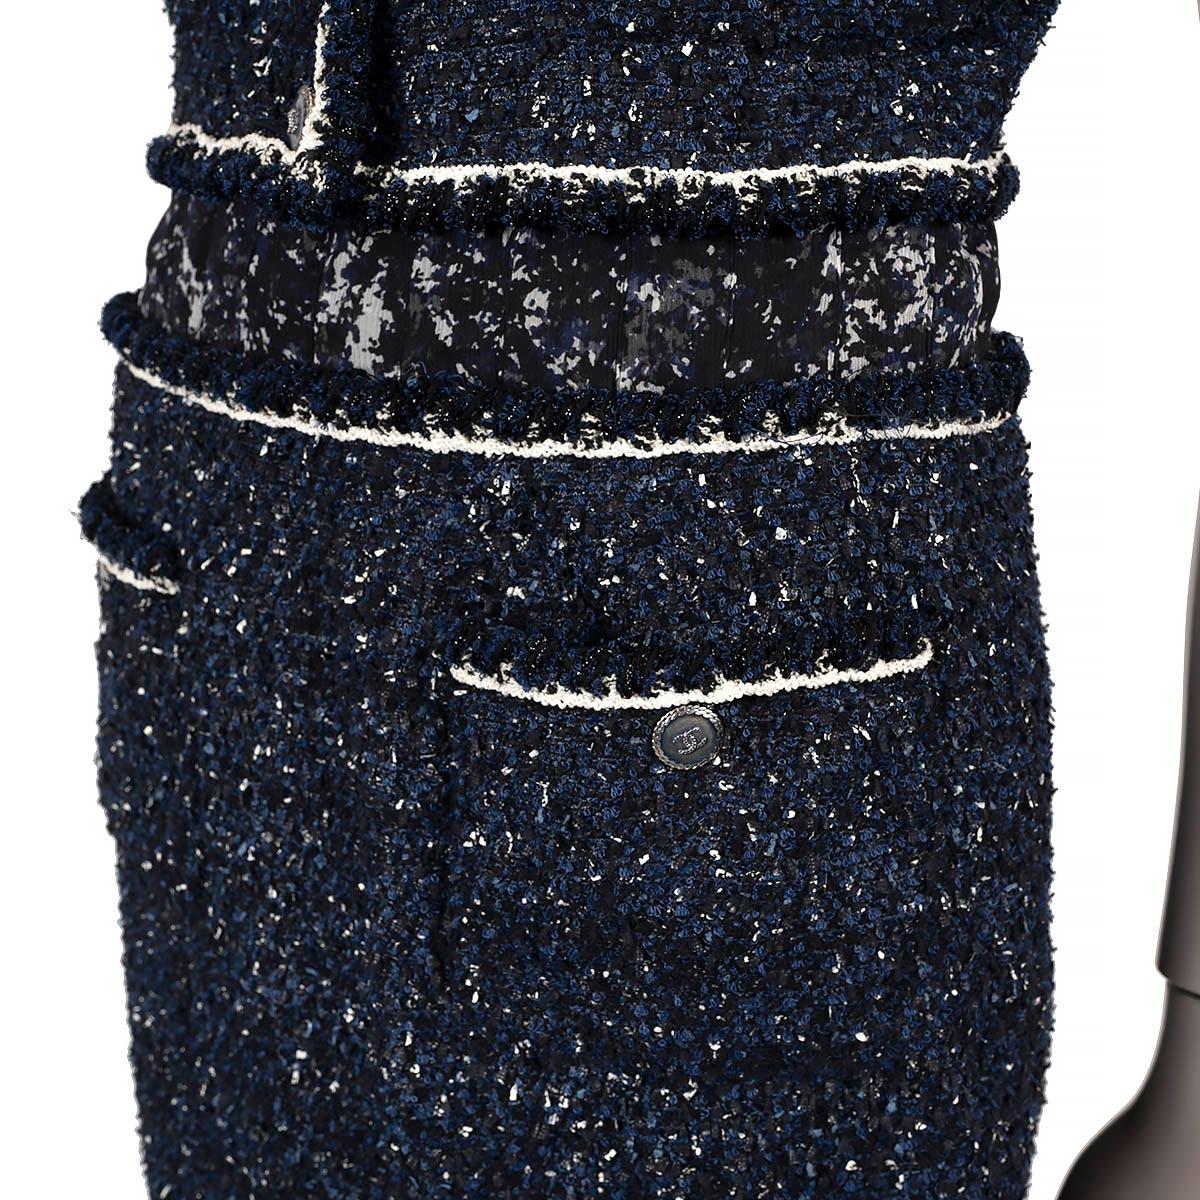 CHANEL navy & black 2012 12P PANELLED TWEED Dress 38 S For Sale 3